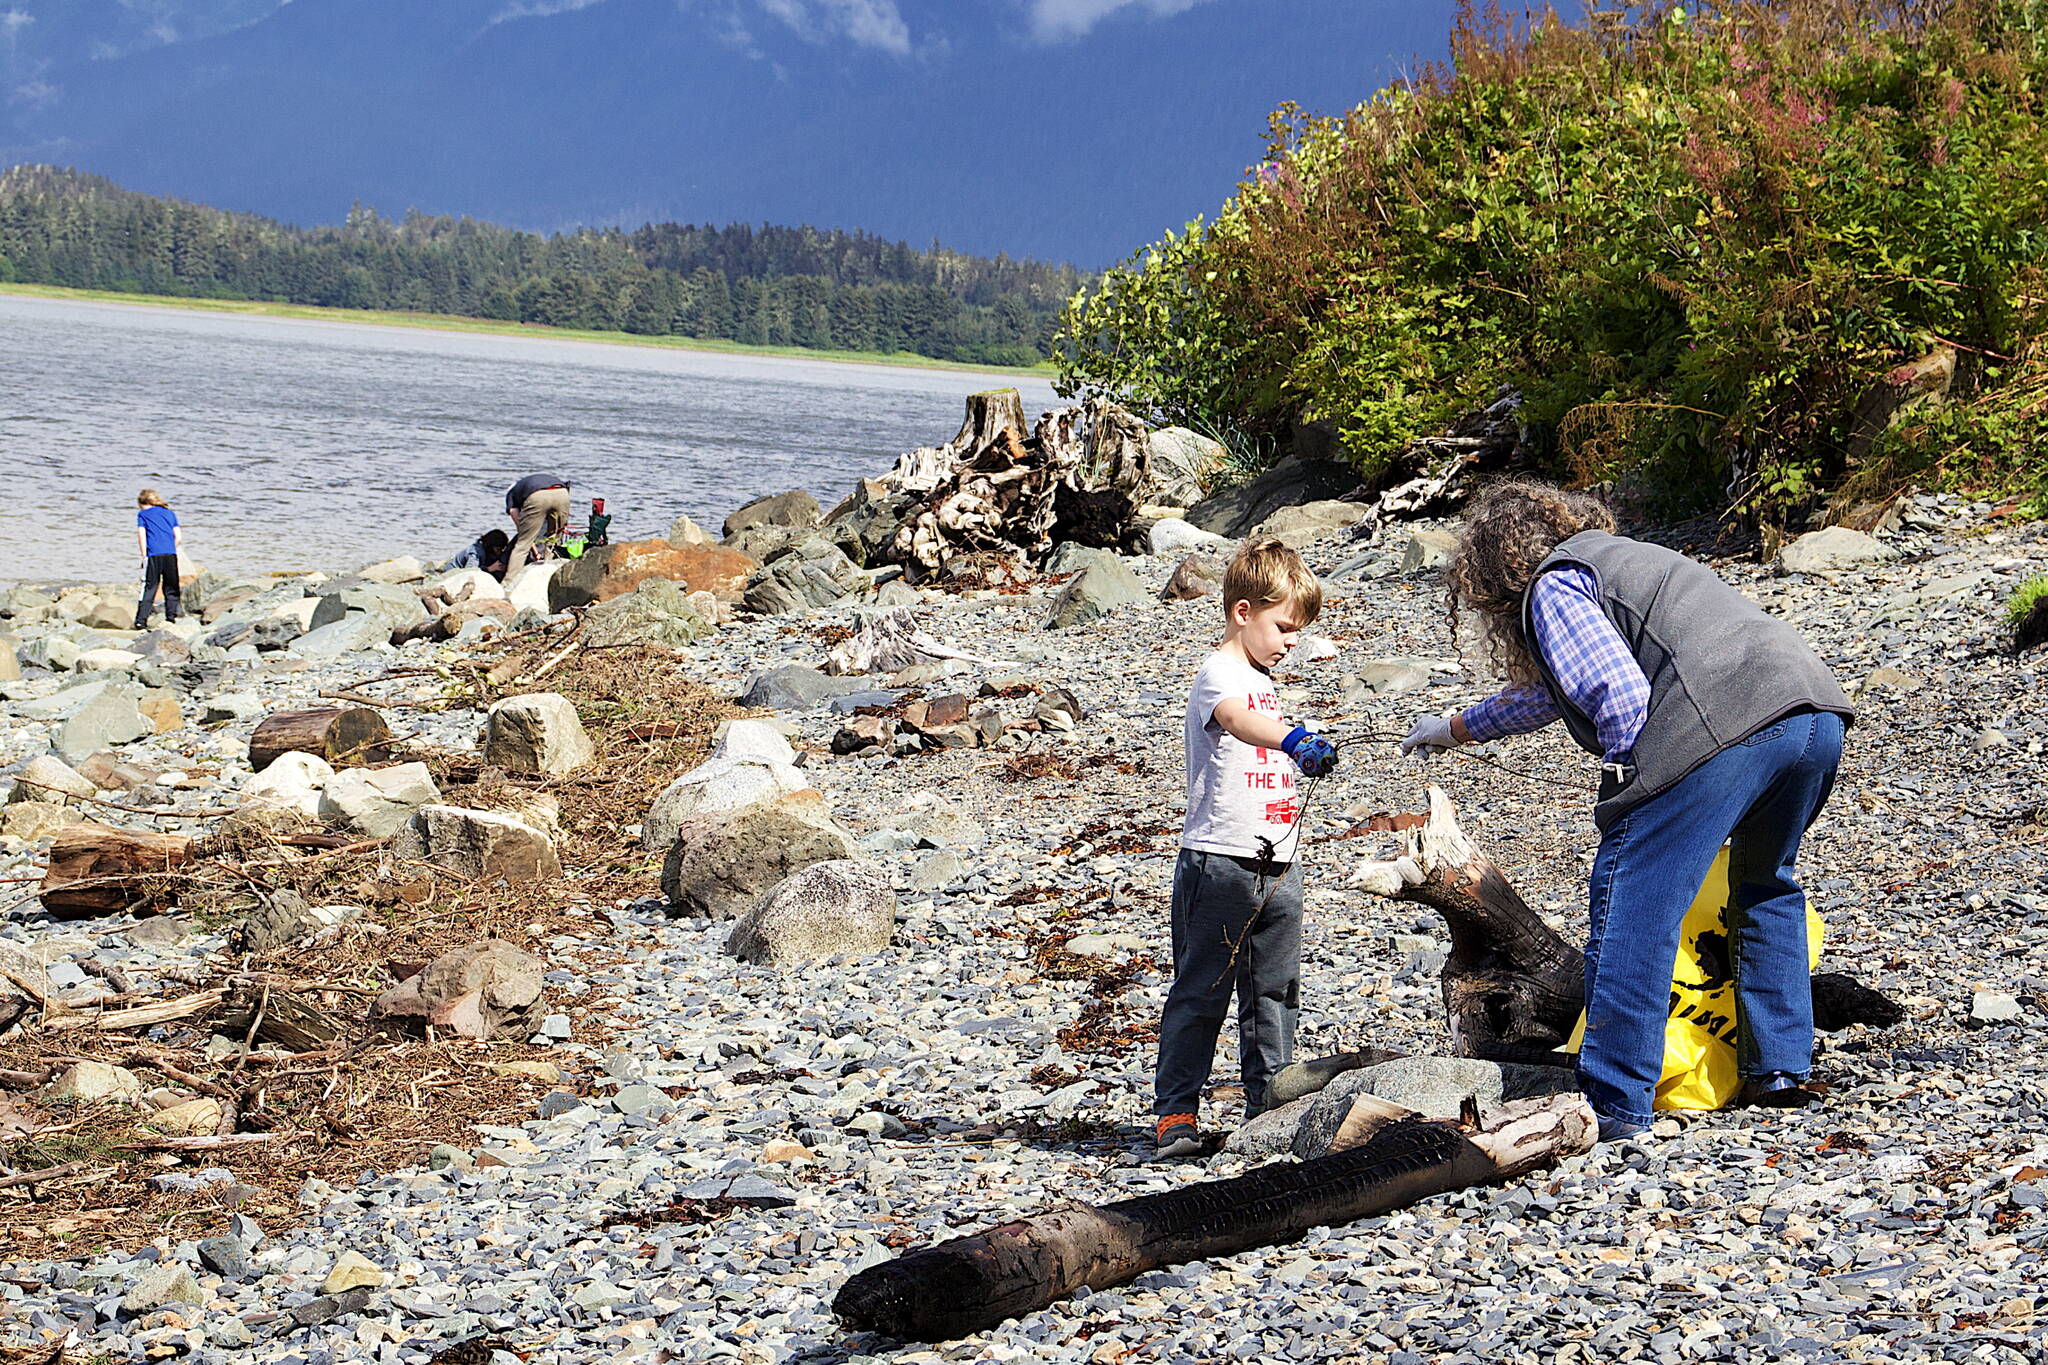 Amos Andreassen, 6, hands a piece of debris to his grandmother, Peggy Tutu, on a beach in North Douglas during a community cleanup Sunday following last weekend’s record flooding of the Mendenhall River. (Mark Sabbatini / Juneau Empire)